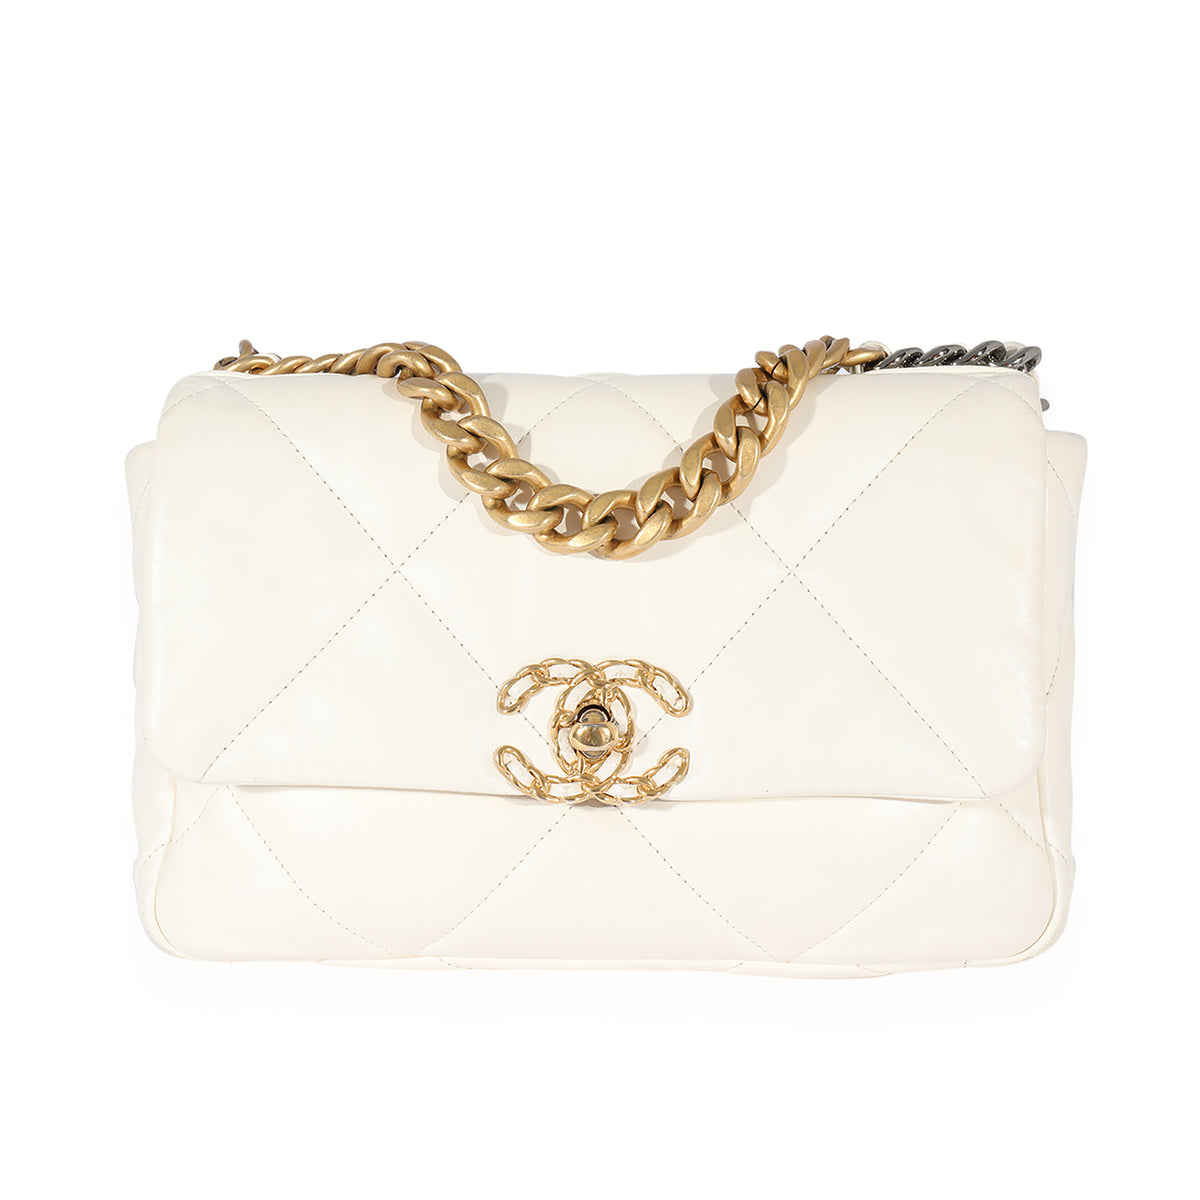 Chanel White Quilted Lambskin Medium Chanel 19 Flap Bag